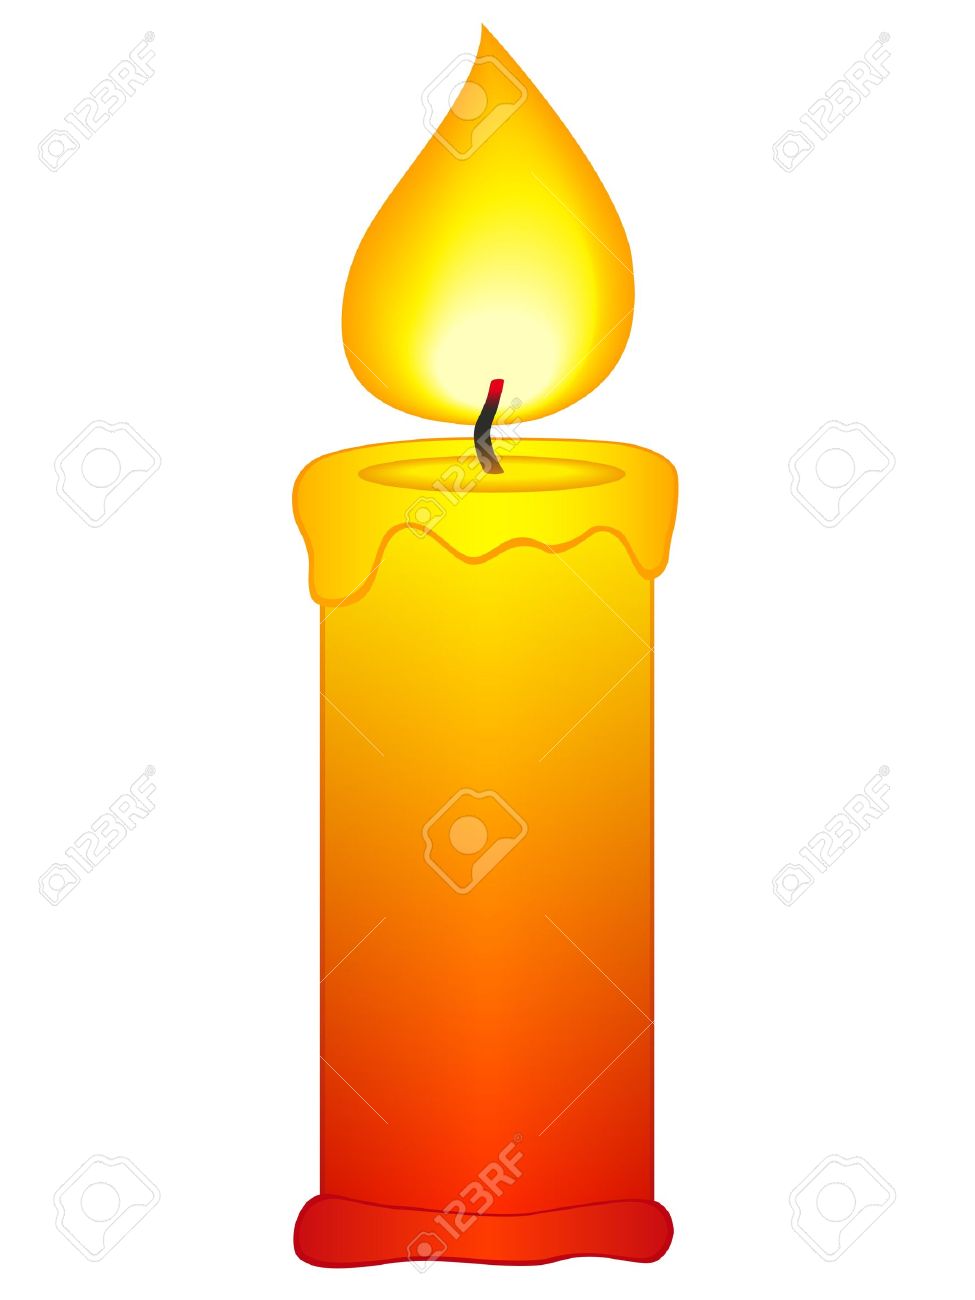 Free White Candle Clip Art